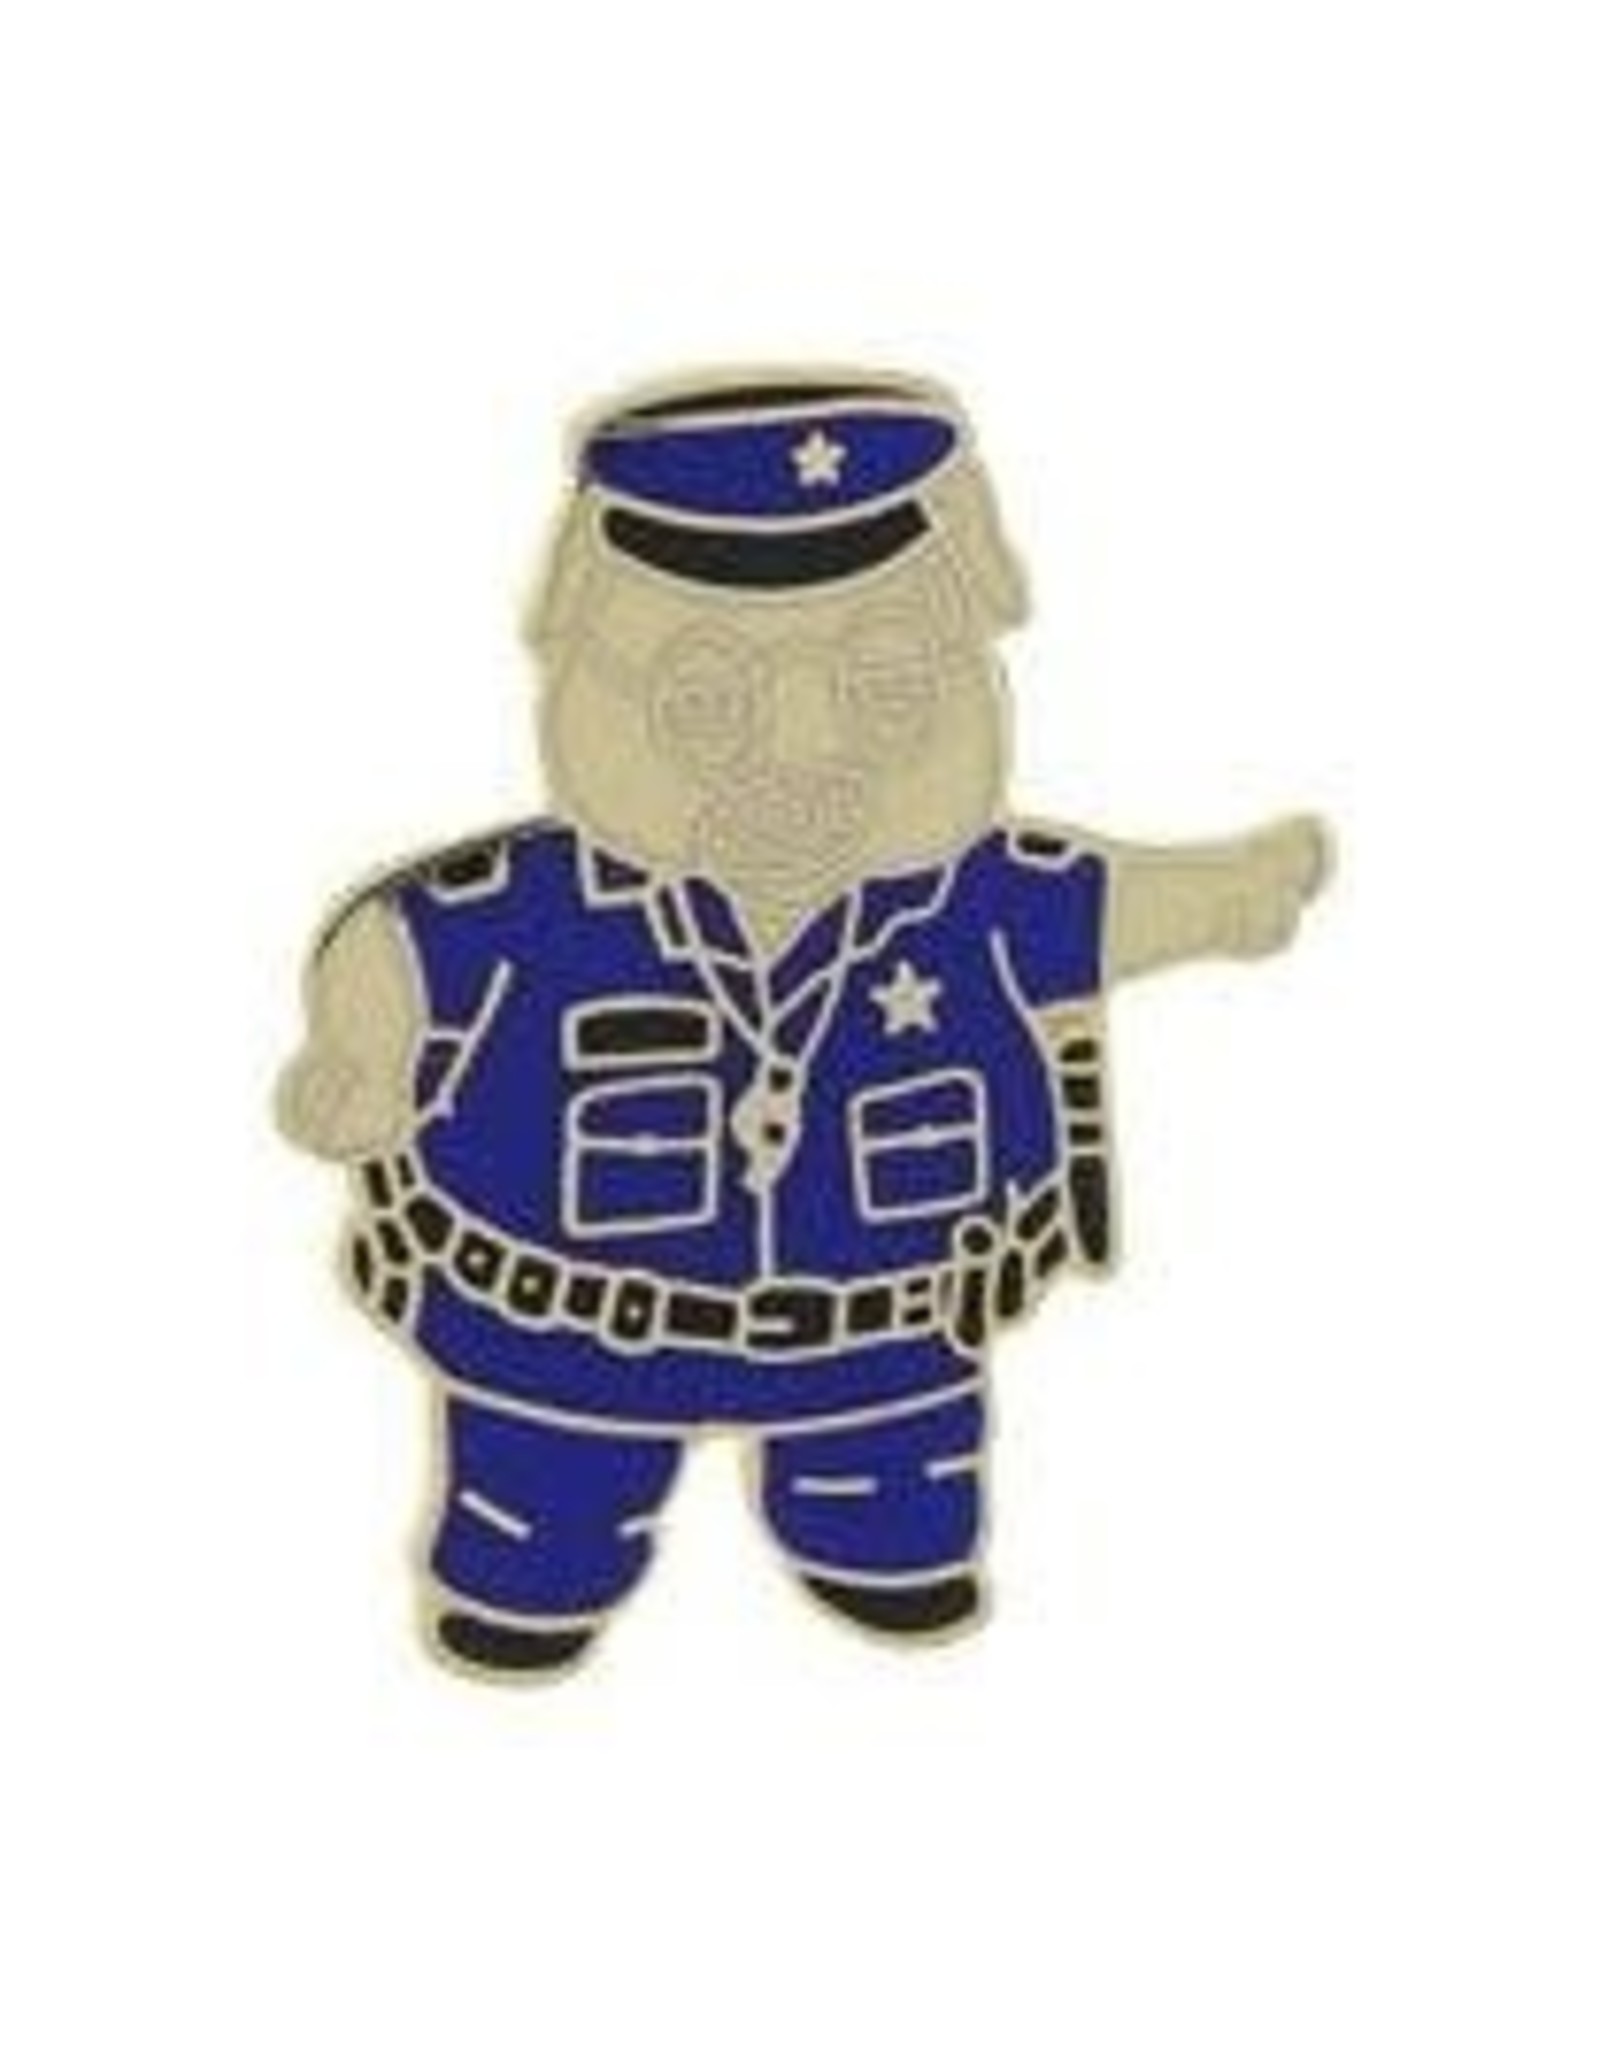 Pin - Police Pig in Uniform